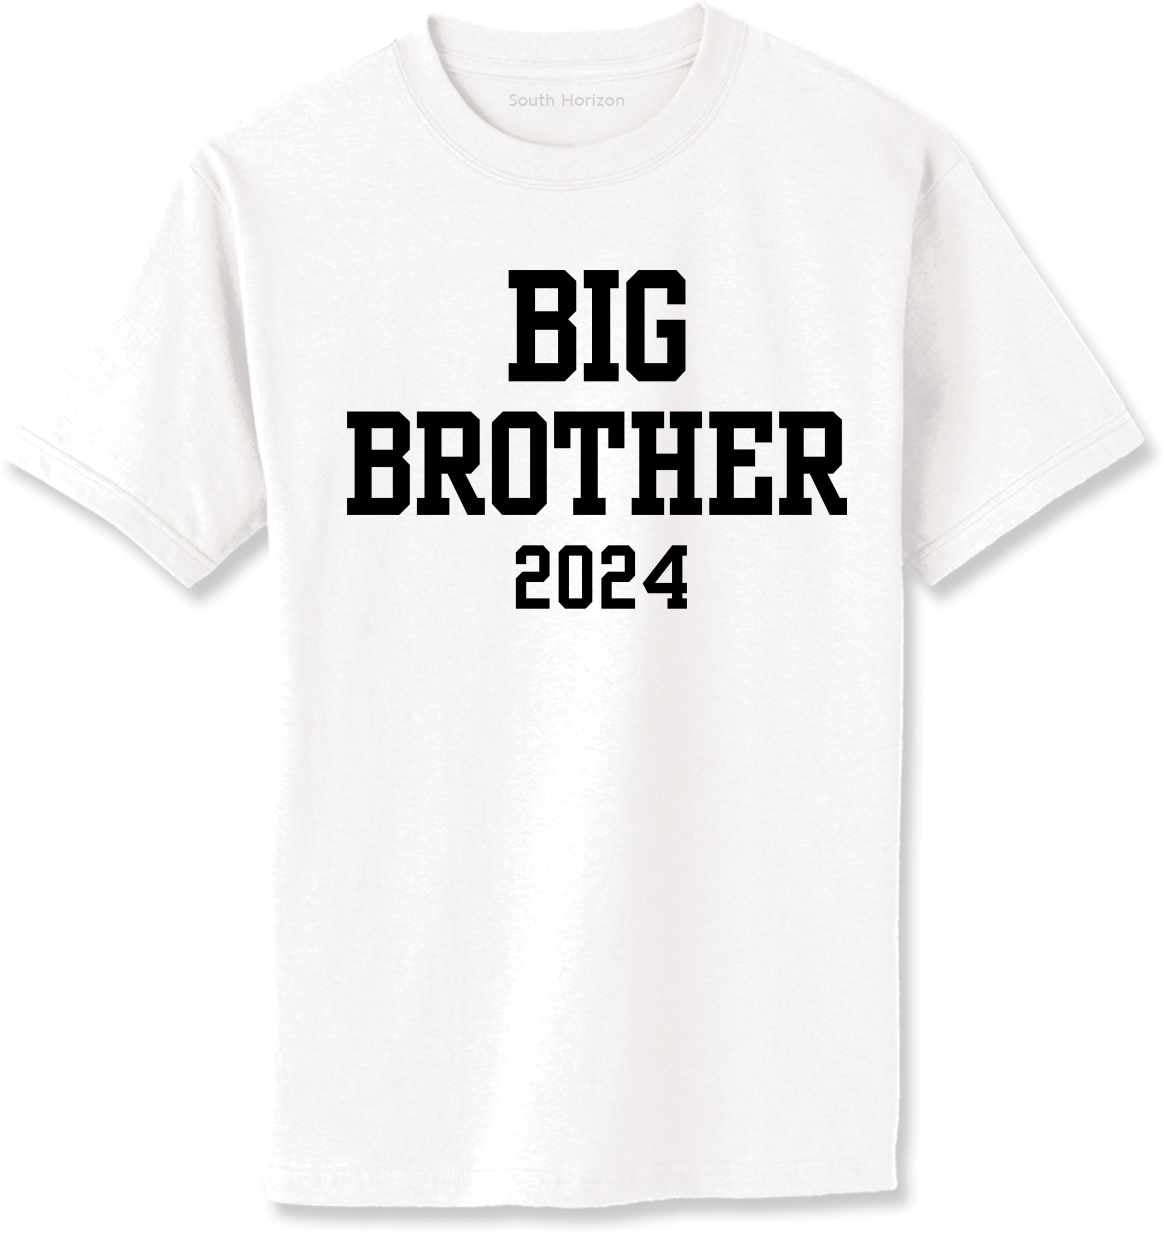 Big Brother 2024 on Adult T-Shirt (#1392-1)